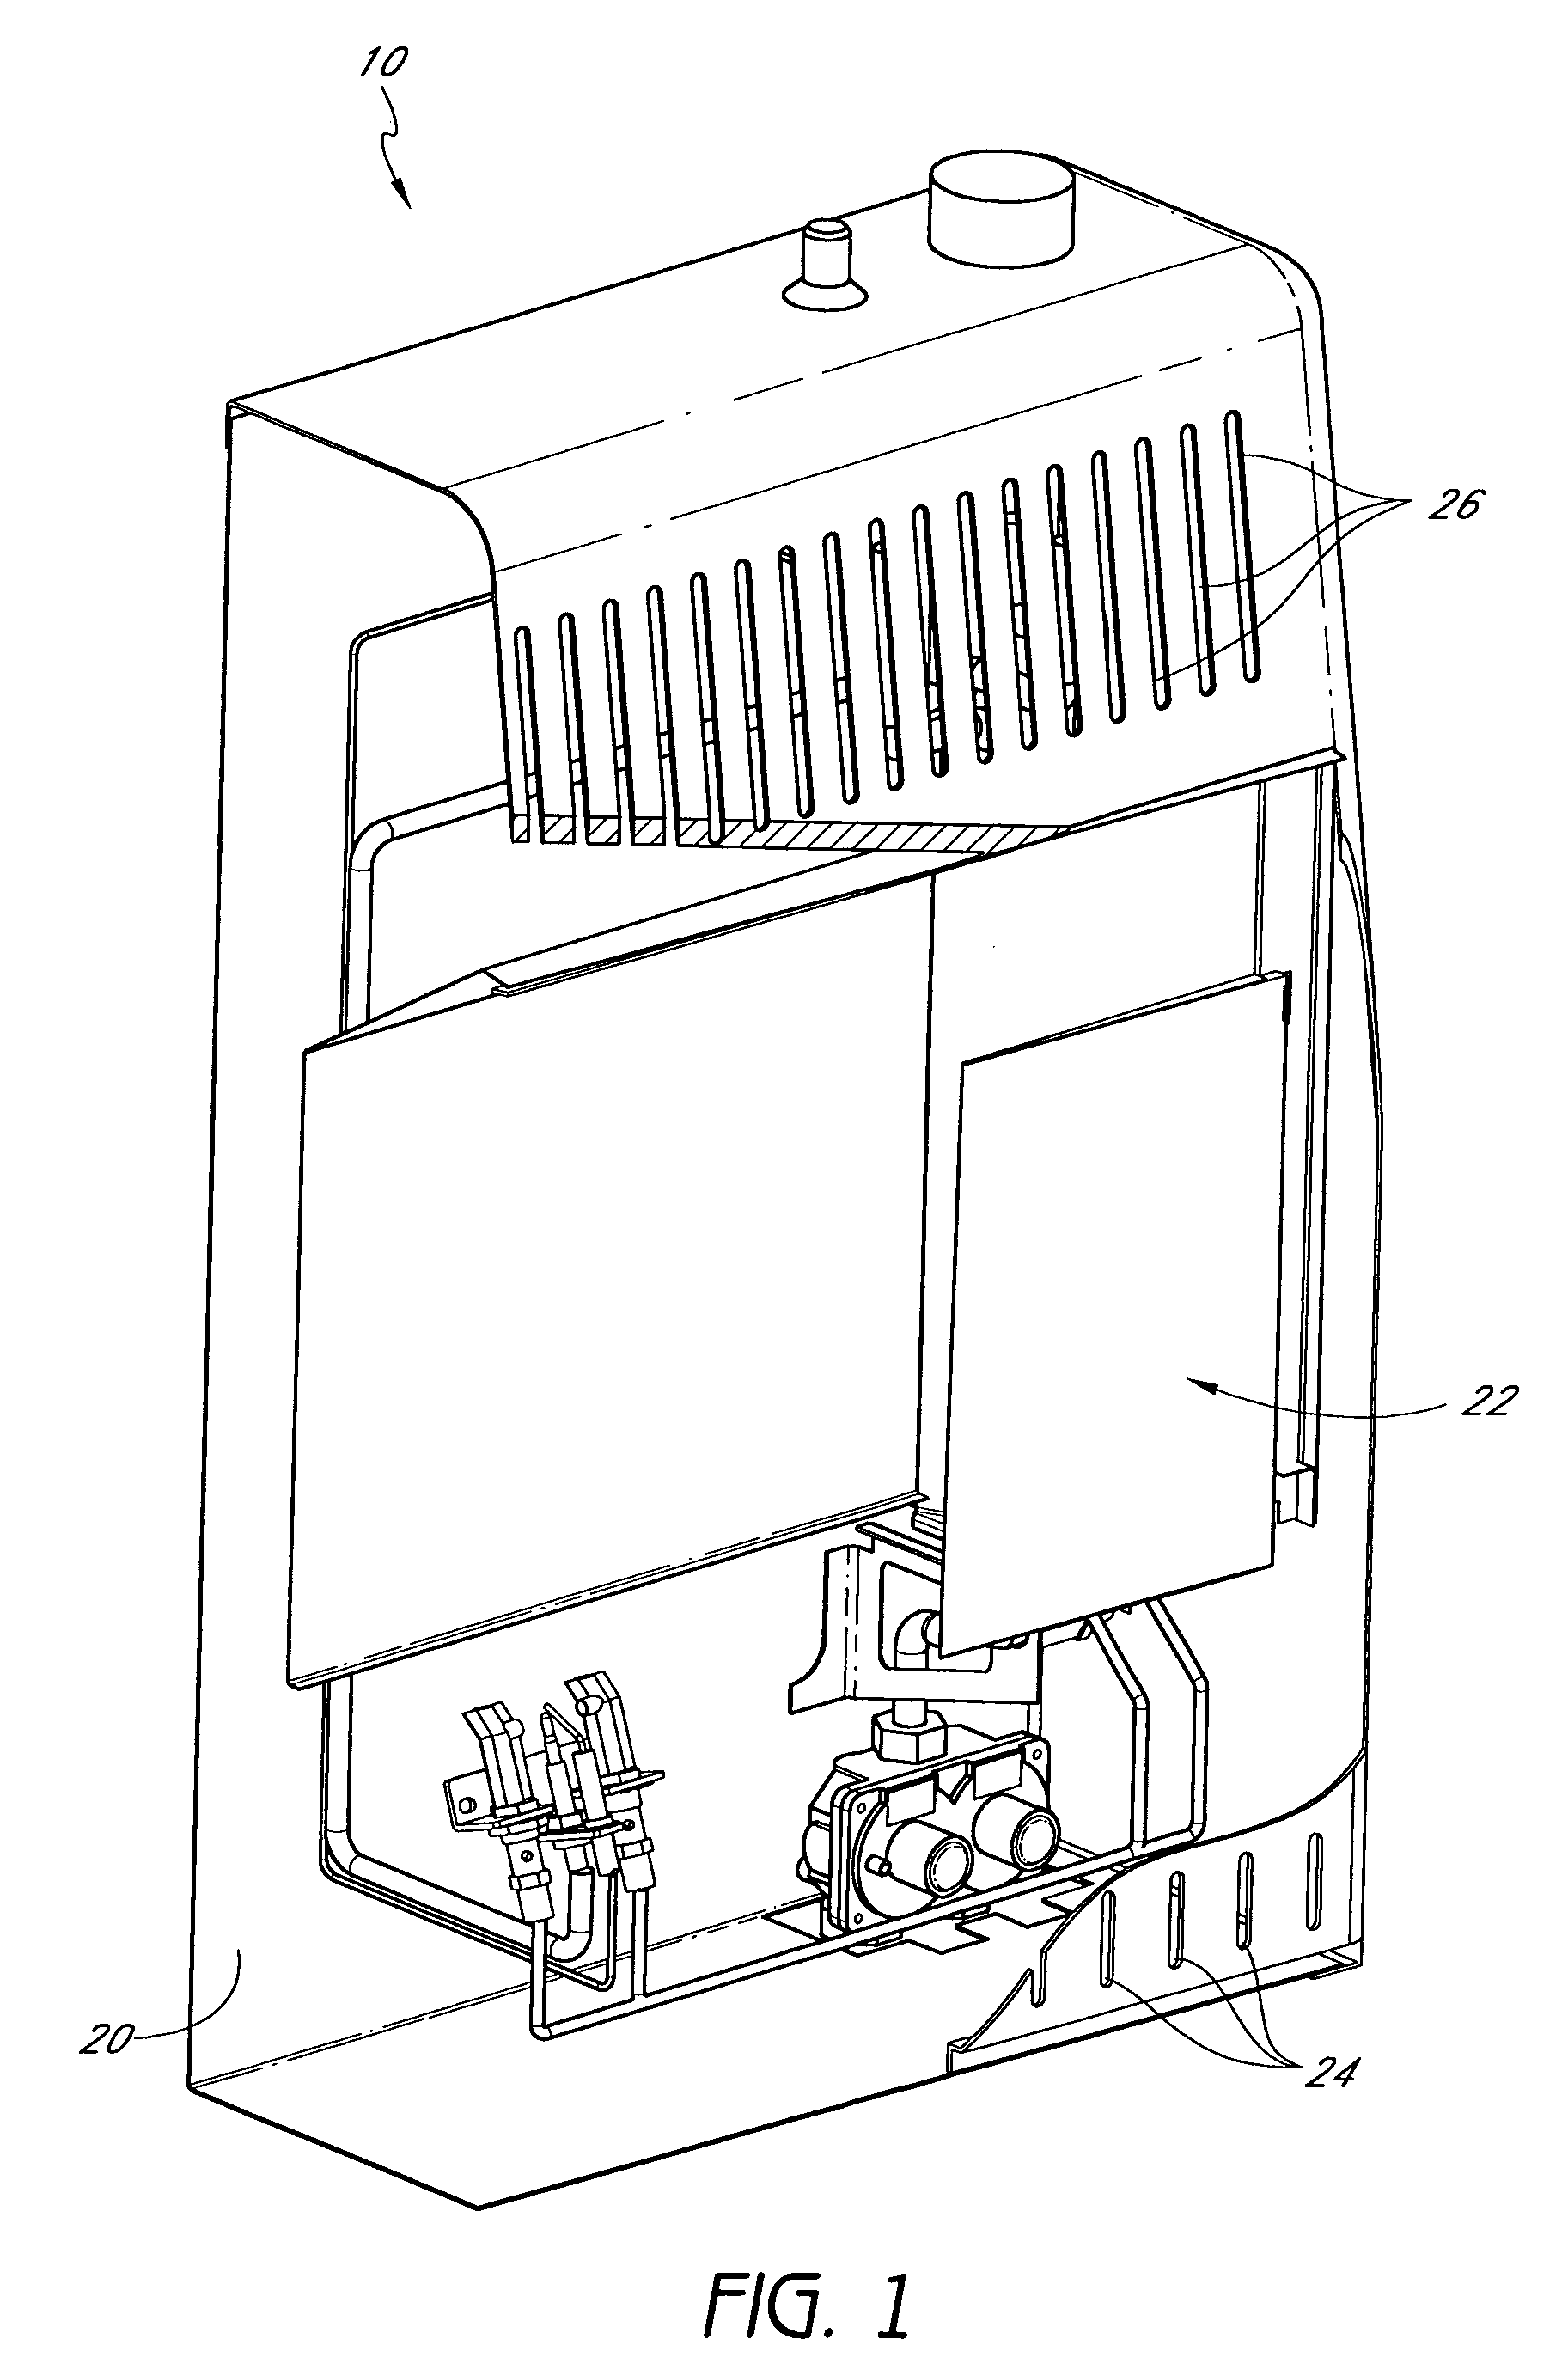 Heater configured to operate with a first or second fuel